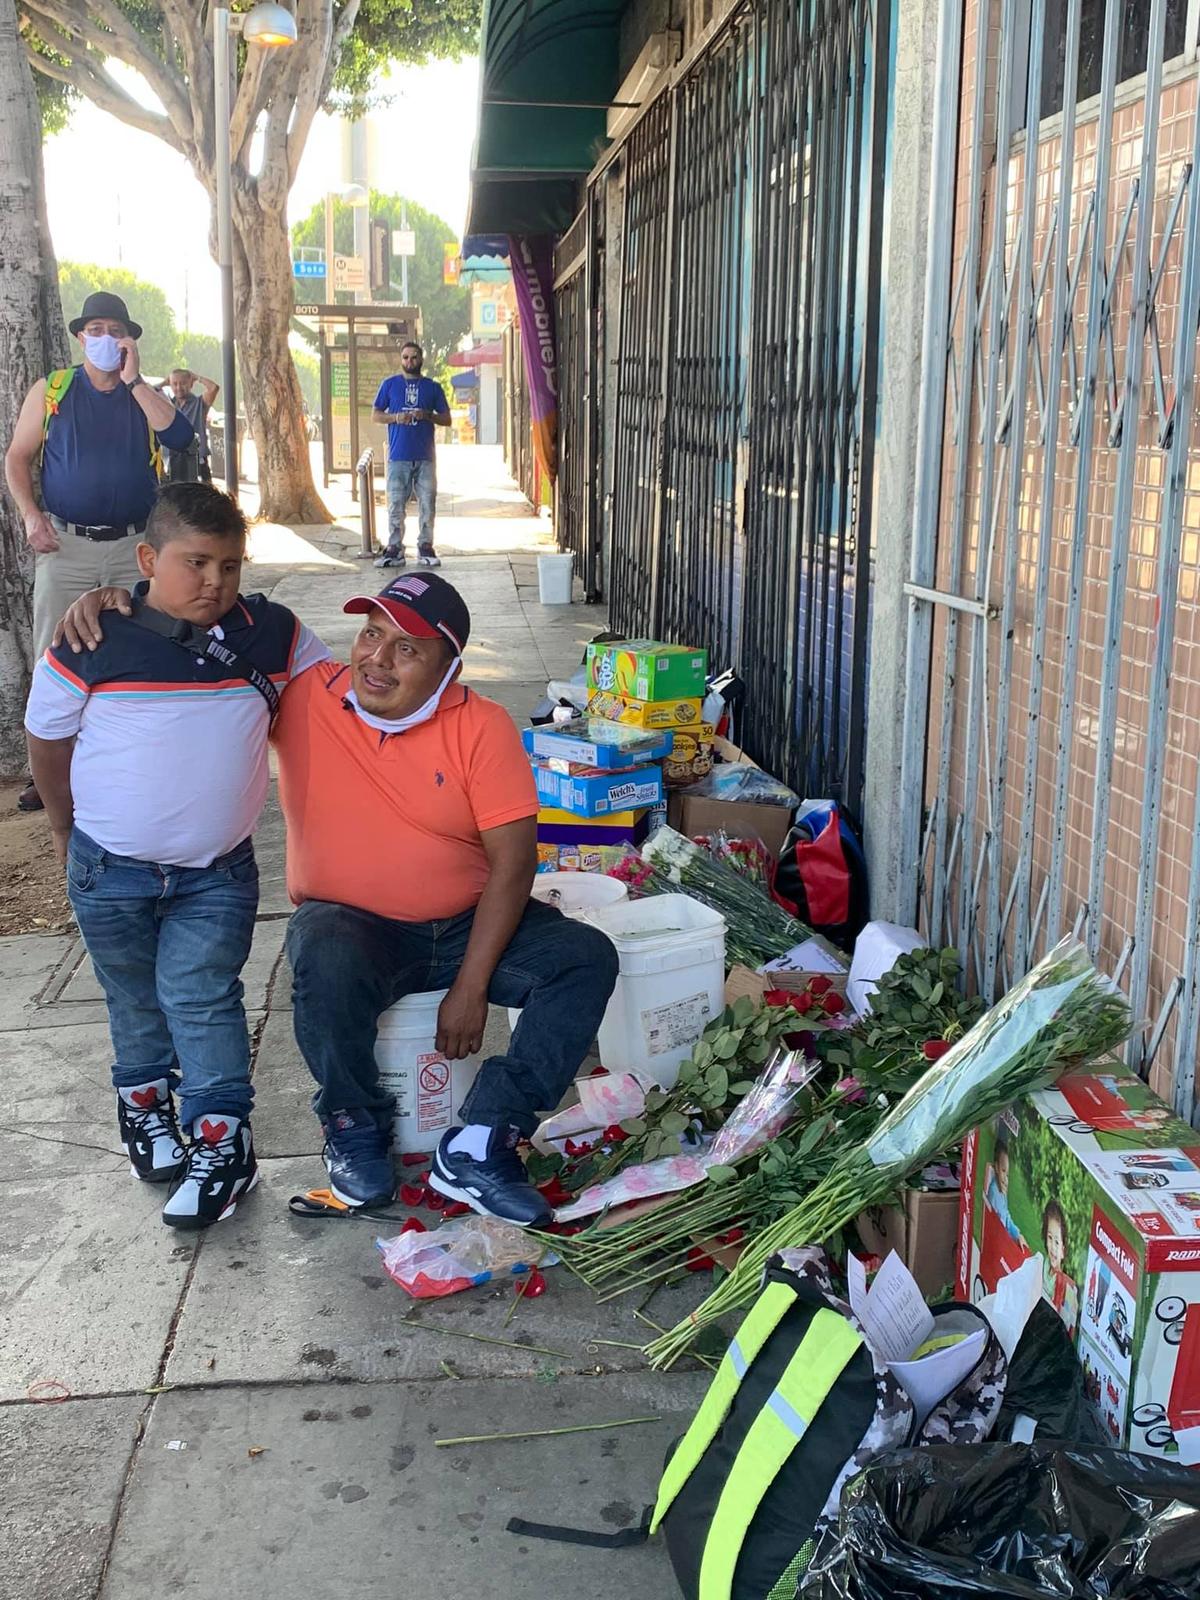 Edgar and his father selling flowers on the street. (Courtesy of <a href="https://www.facebook.com/erik.luevanos/posts/3152694684820443">Erik Luevanos</a>)